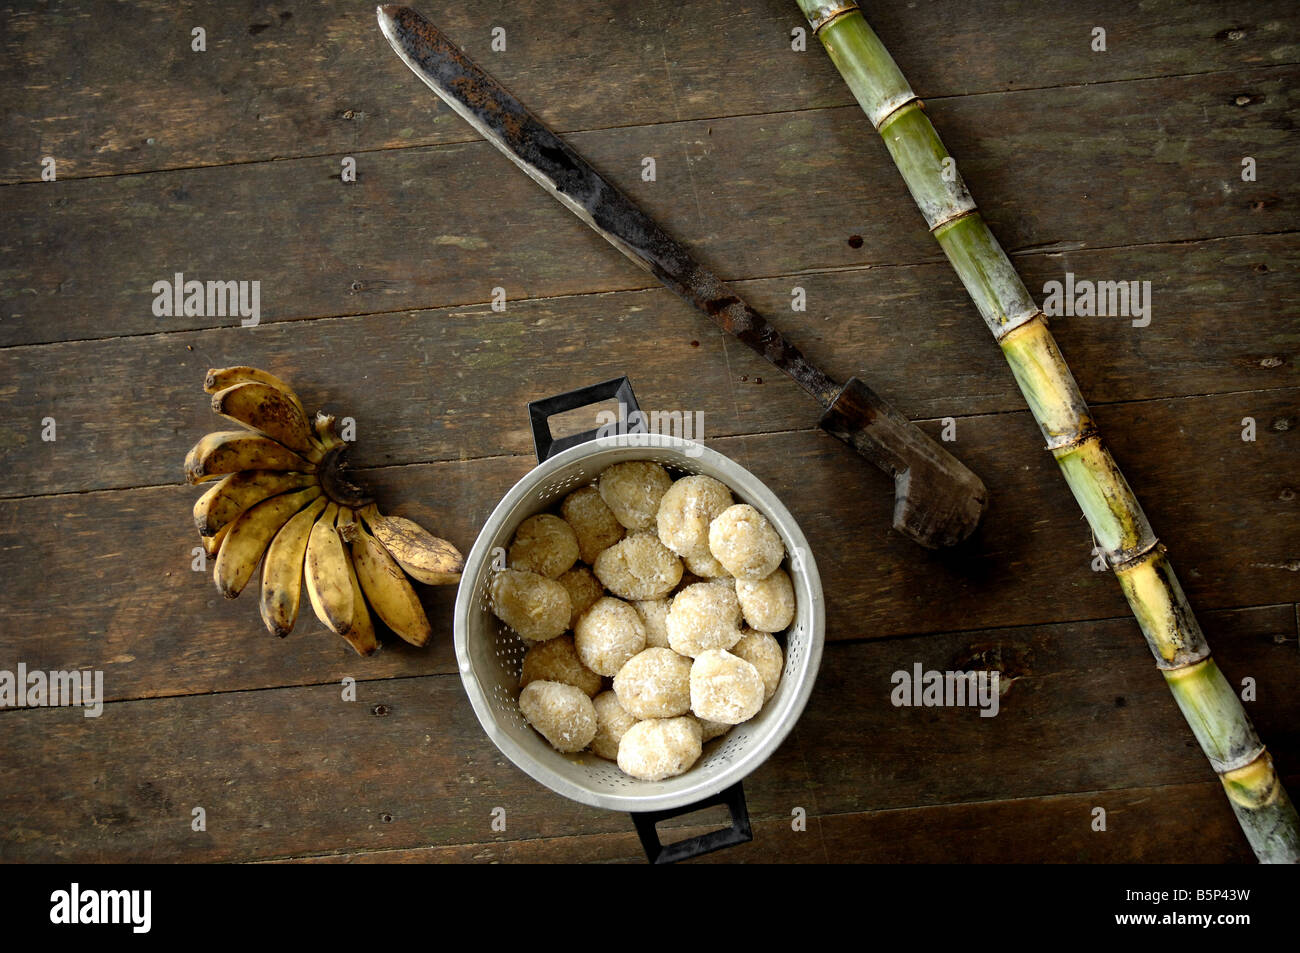 A typical subsistence meal in the Mentawai Islands of Indonesia Stock Photo